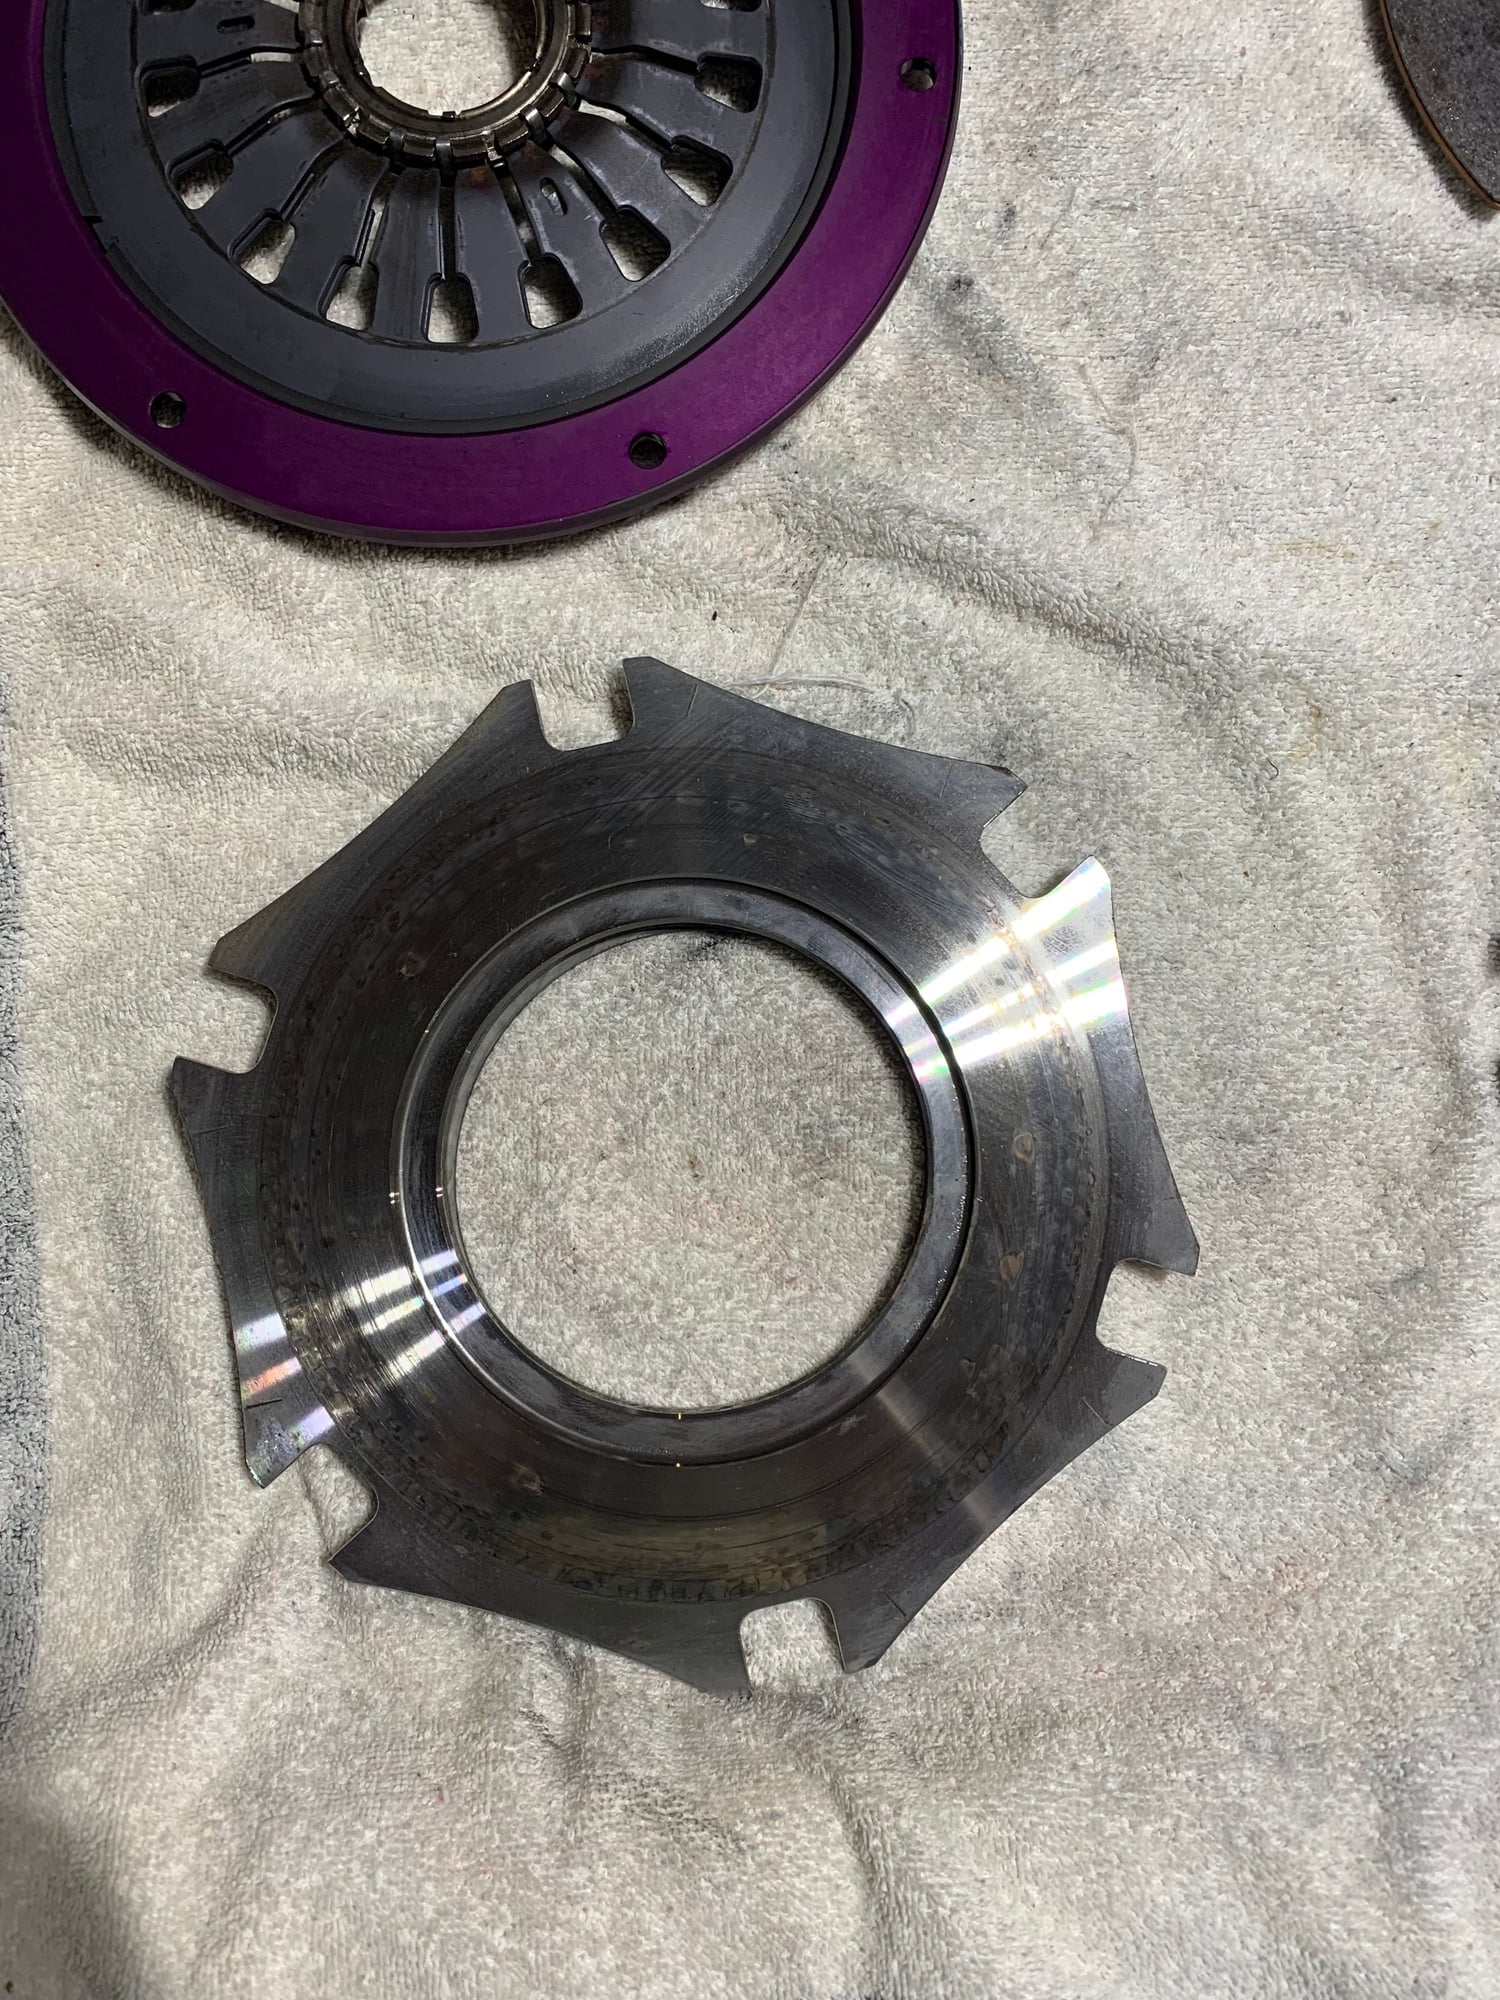 Drivetrain - Barely used Exedy Twin disc clutch - Used - 1993 to 2001 Mazda RX-7 - Chicago, IL 60657, United States